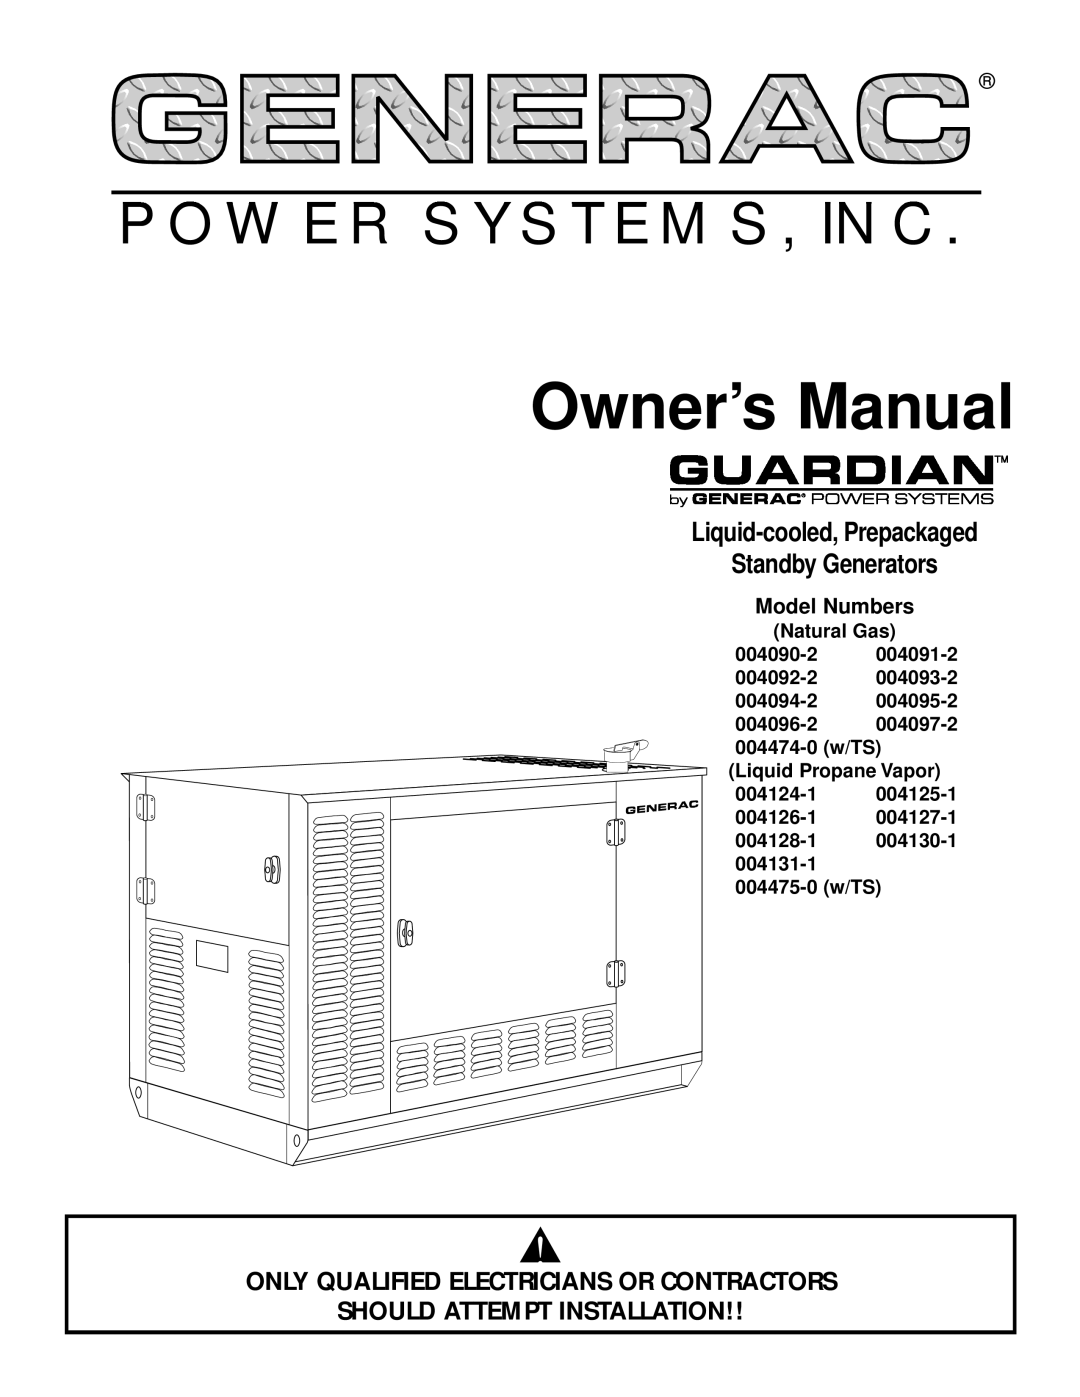 Generac Power Systems owner manual Power Systems, Inc, Liquid-cooled, Prepackaged Standby Generators, Model Numbers 